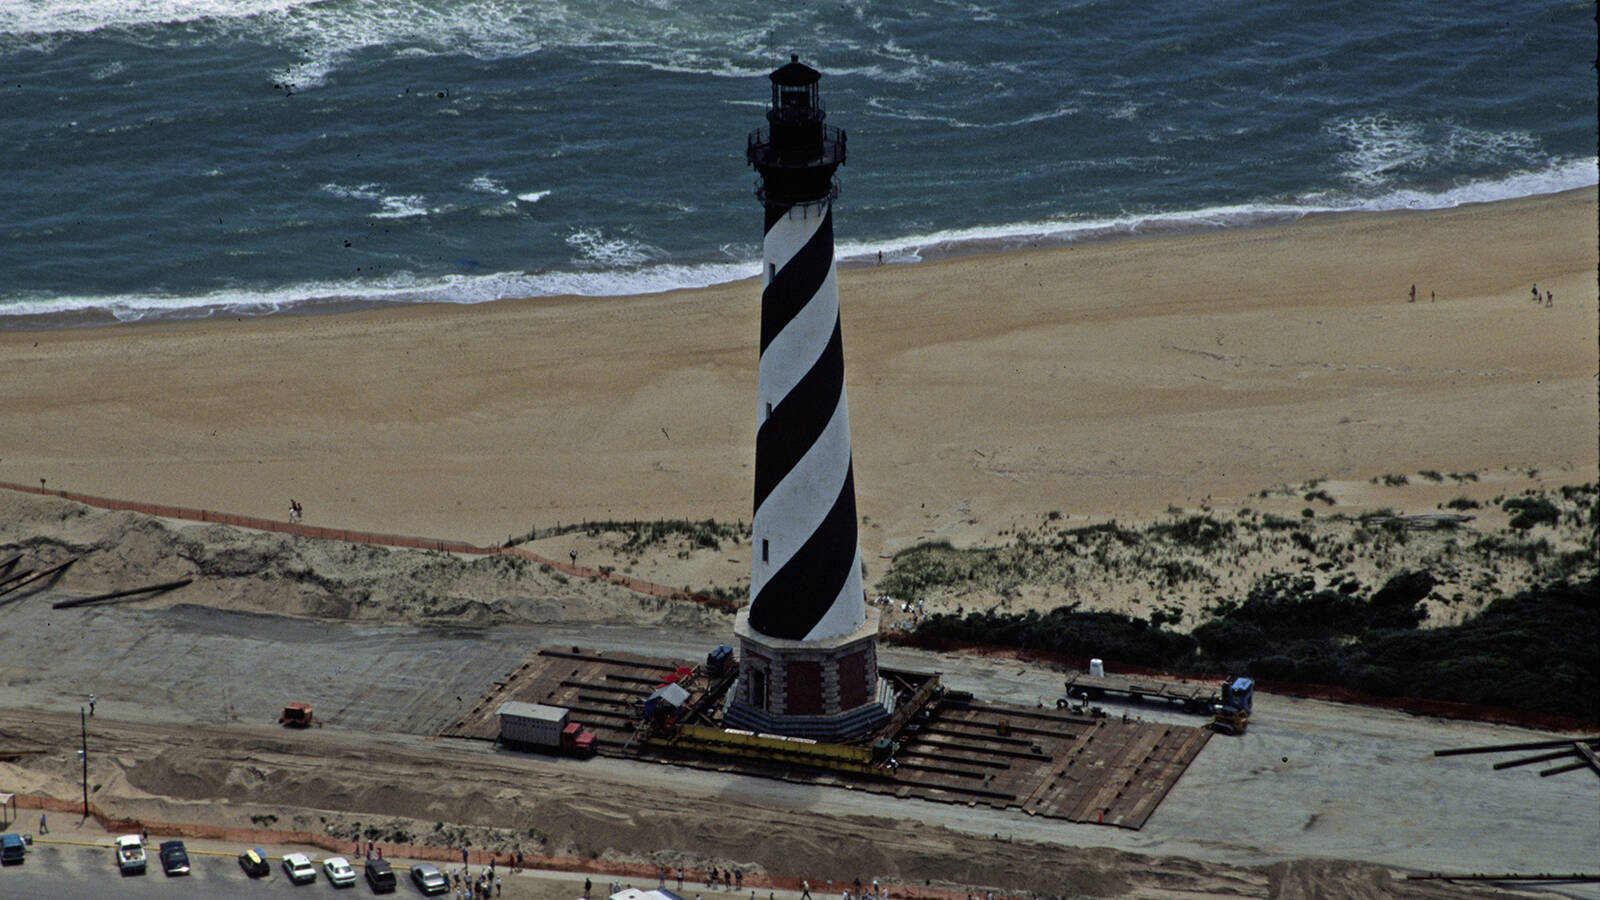 <p>The Cape Hatteras Lighthouse, pictured June 24, 1999, makes its slow progression on rollers and a rail system toward its new home further inland. The move took 23 days. </p>
<p> </p>